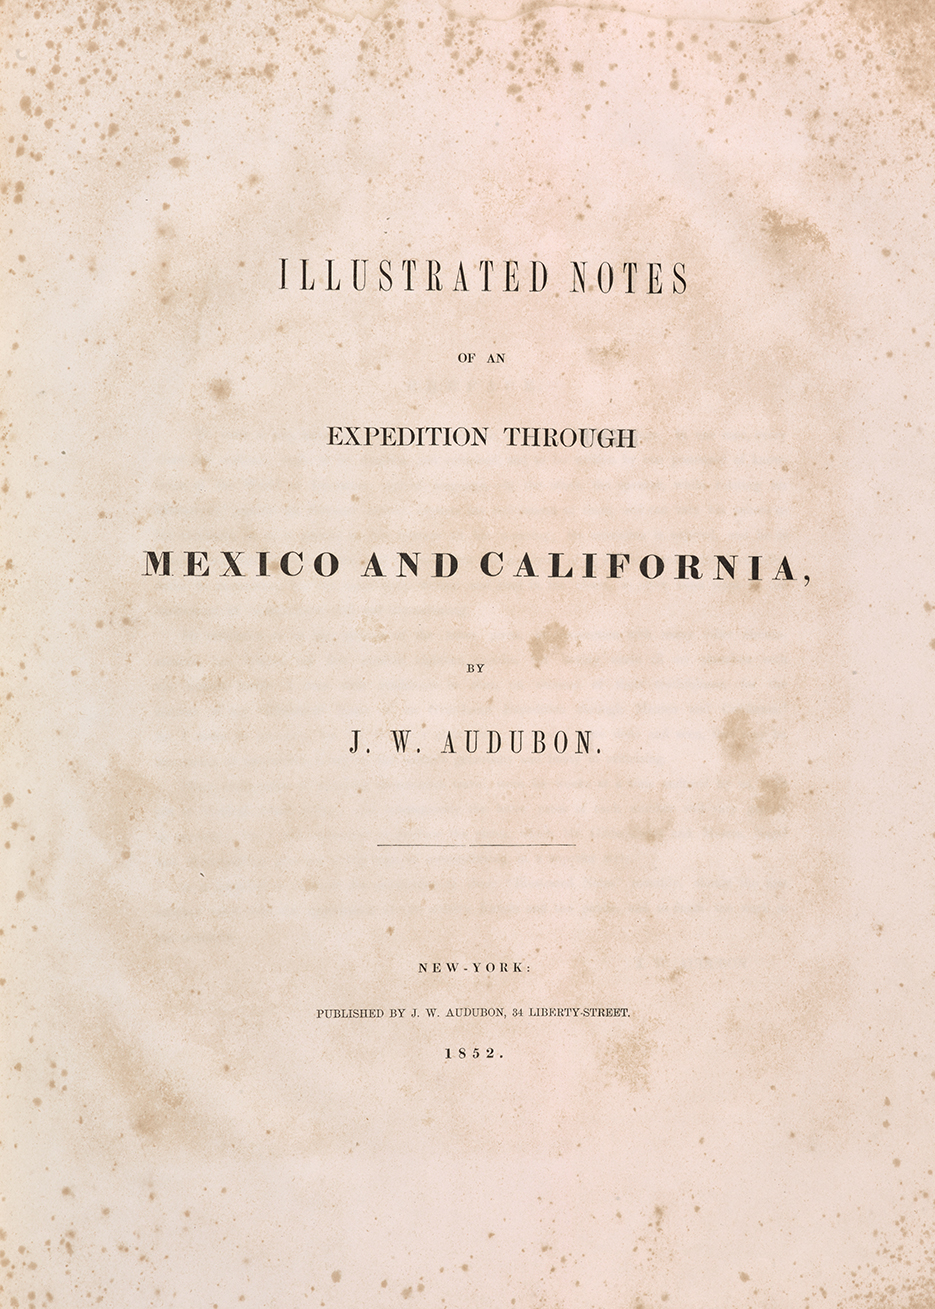 Image: llustrated Notes of an Expedition Through Mexico and California (pictured: title page)